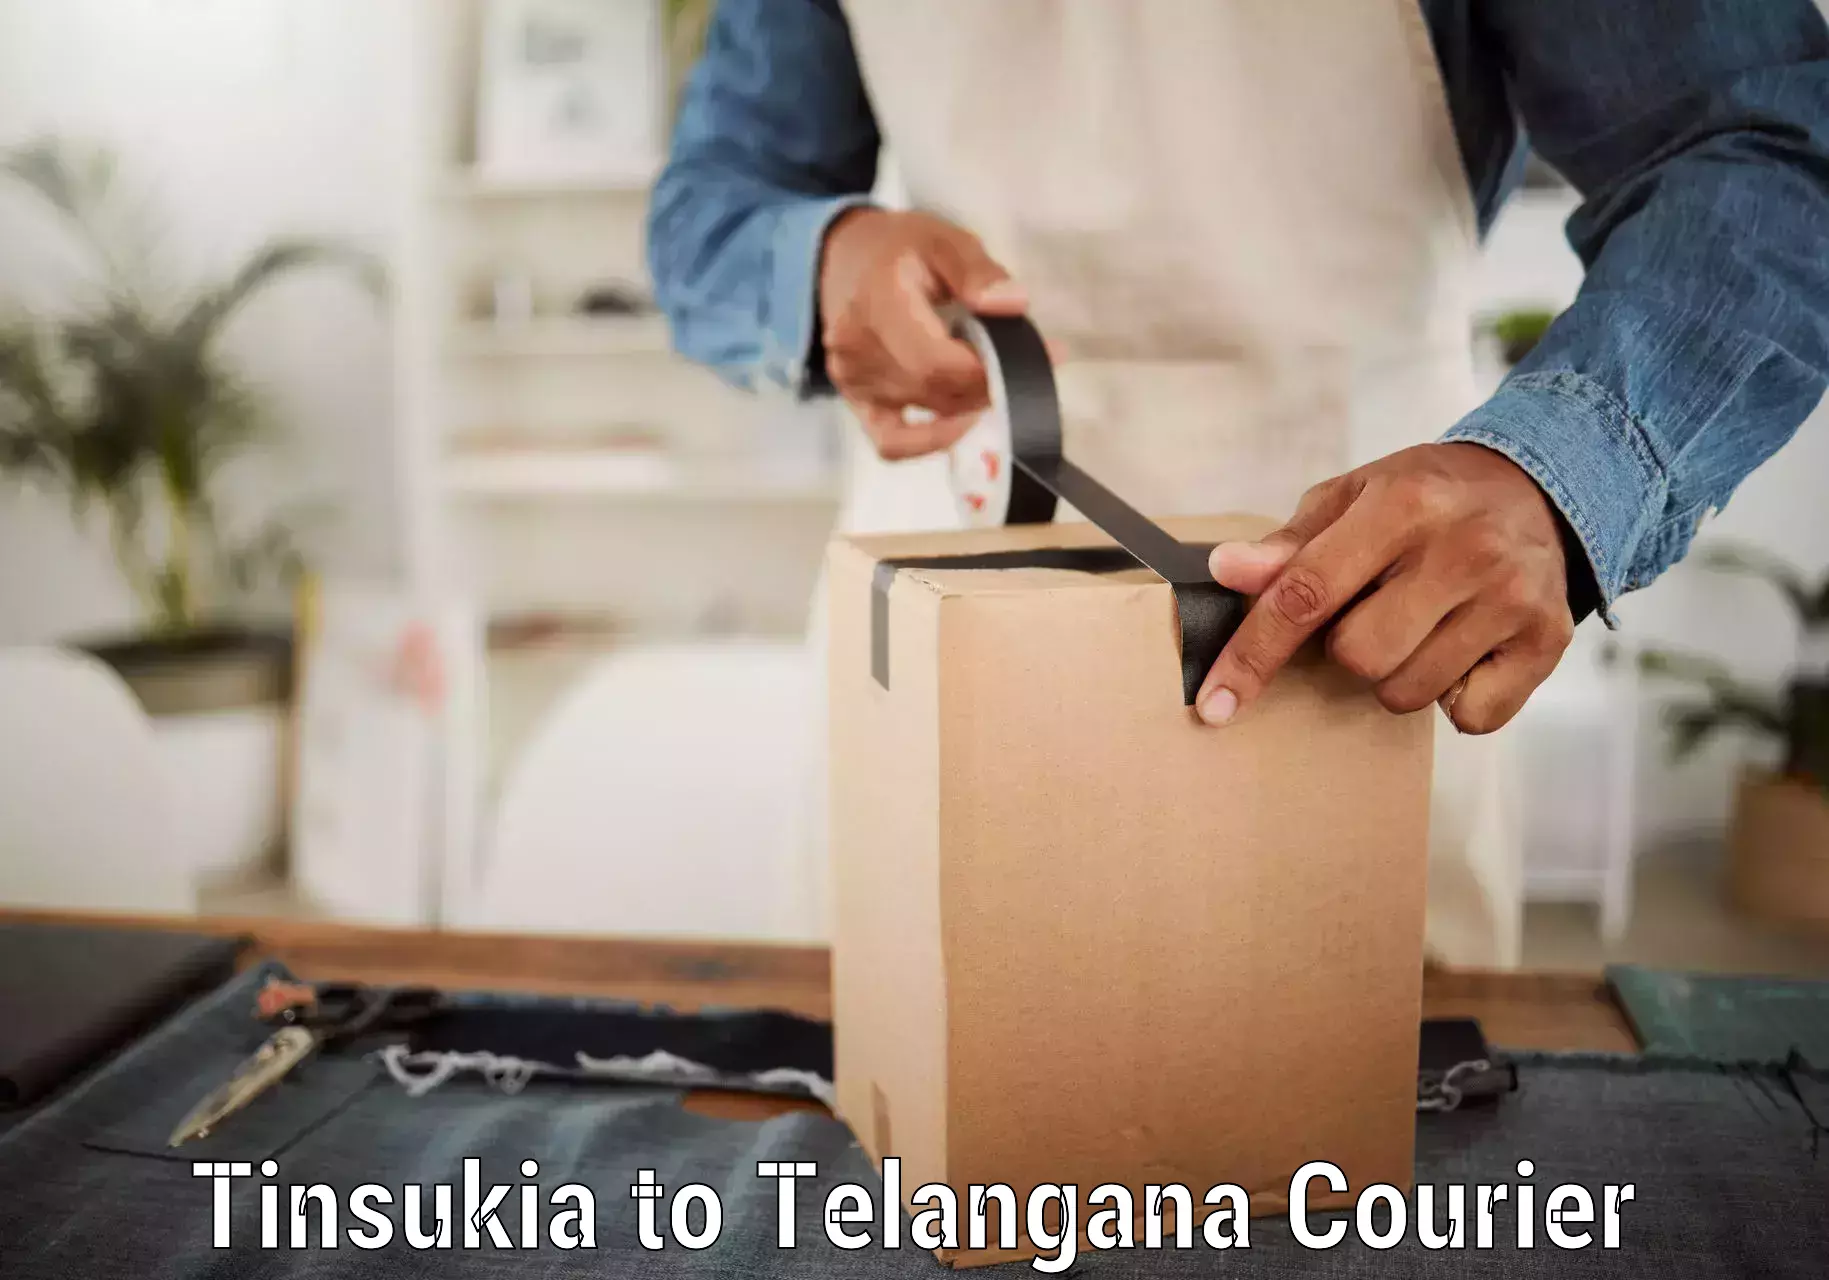 Flexible delivery scheduling Tinsukia to Mancherial